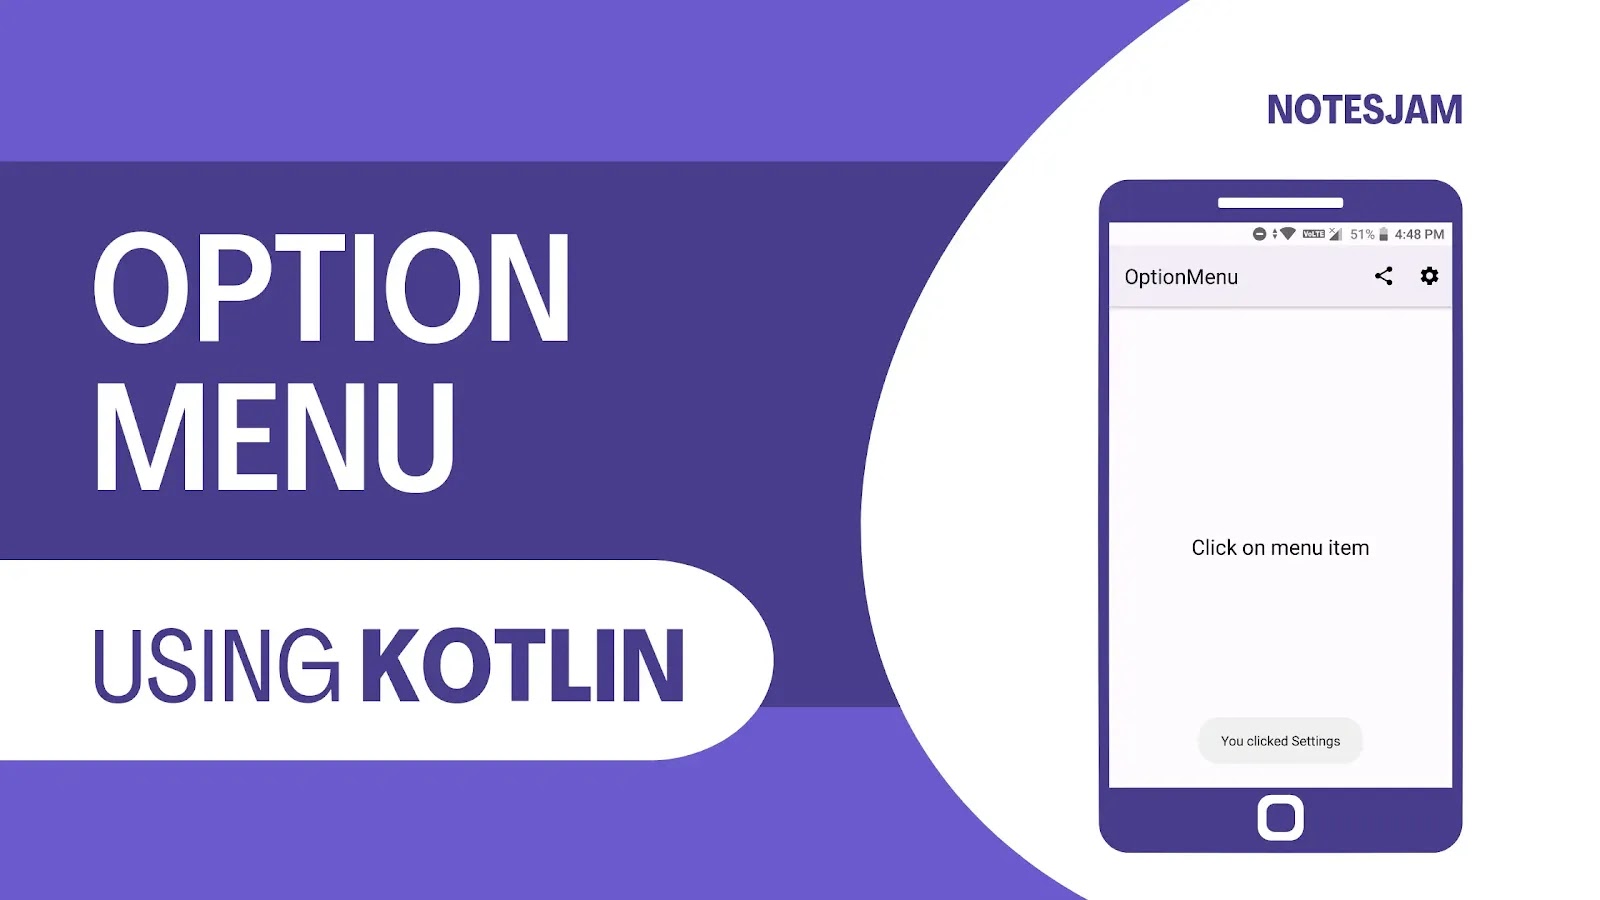 Step by Step Guide to Creating Option Menu in Android Using Kotlin